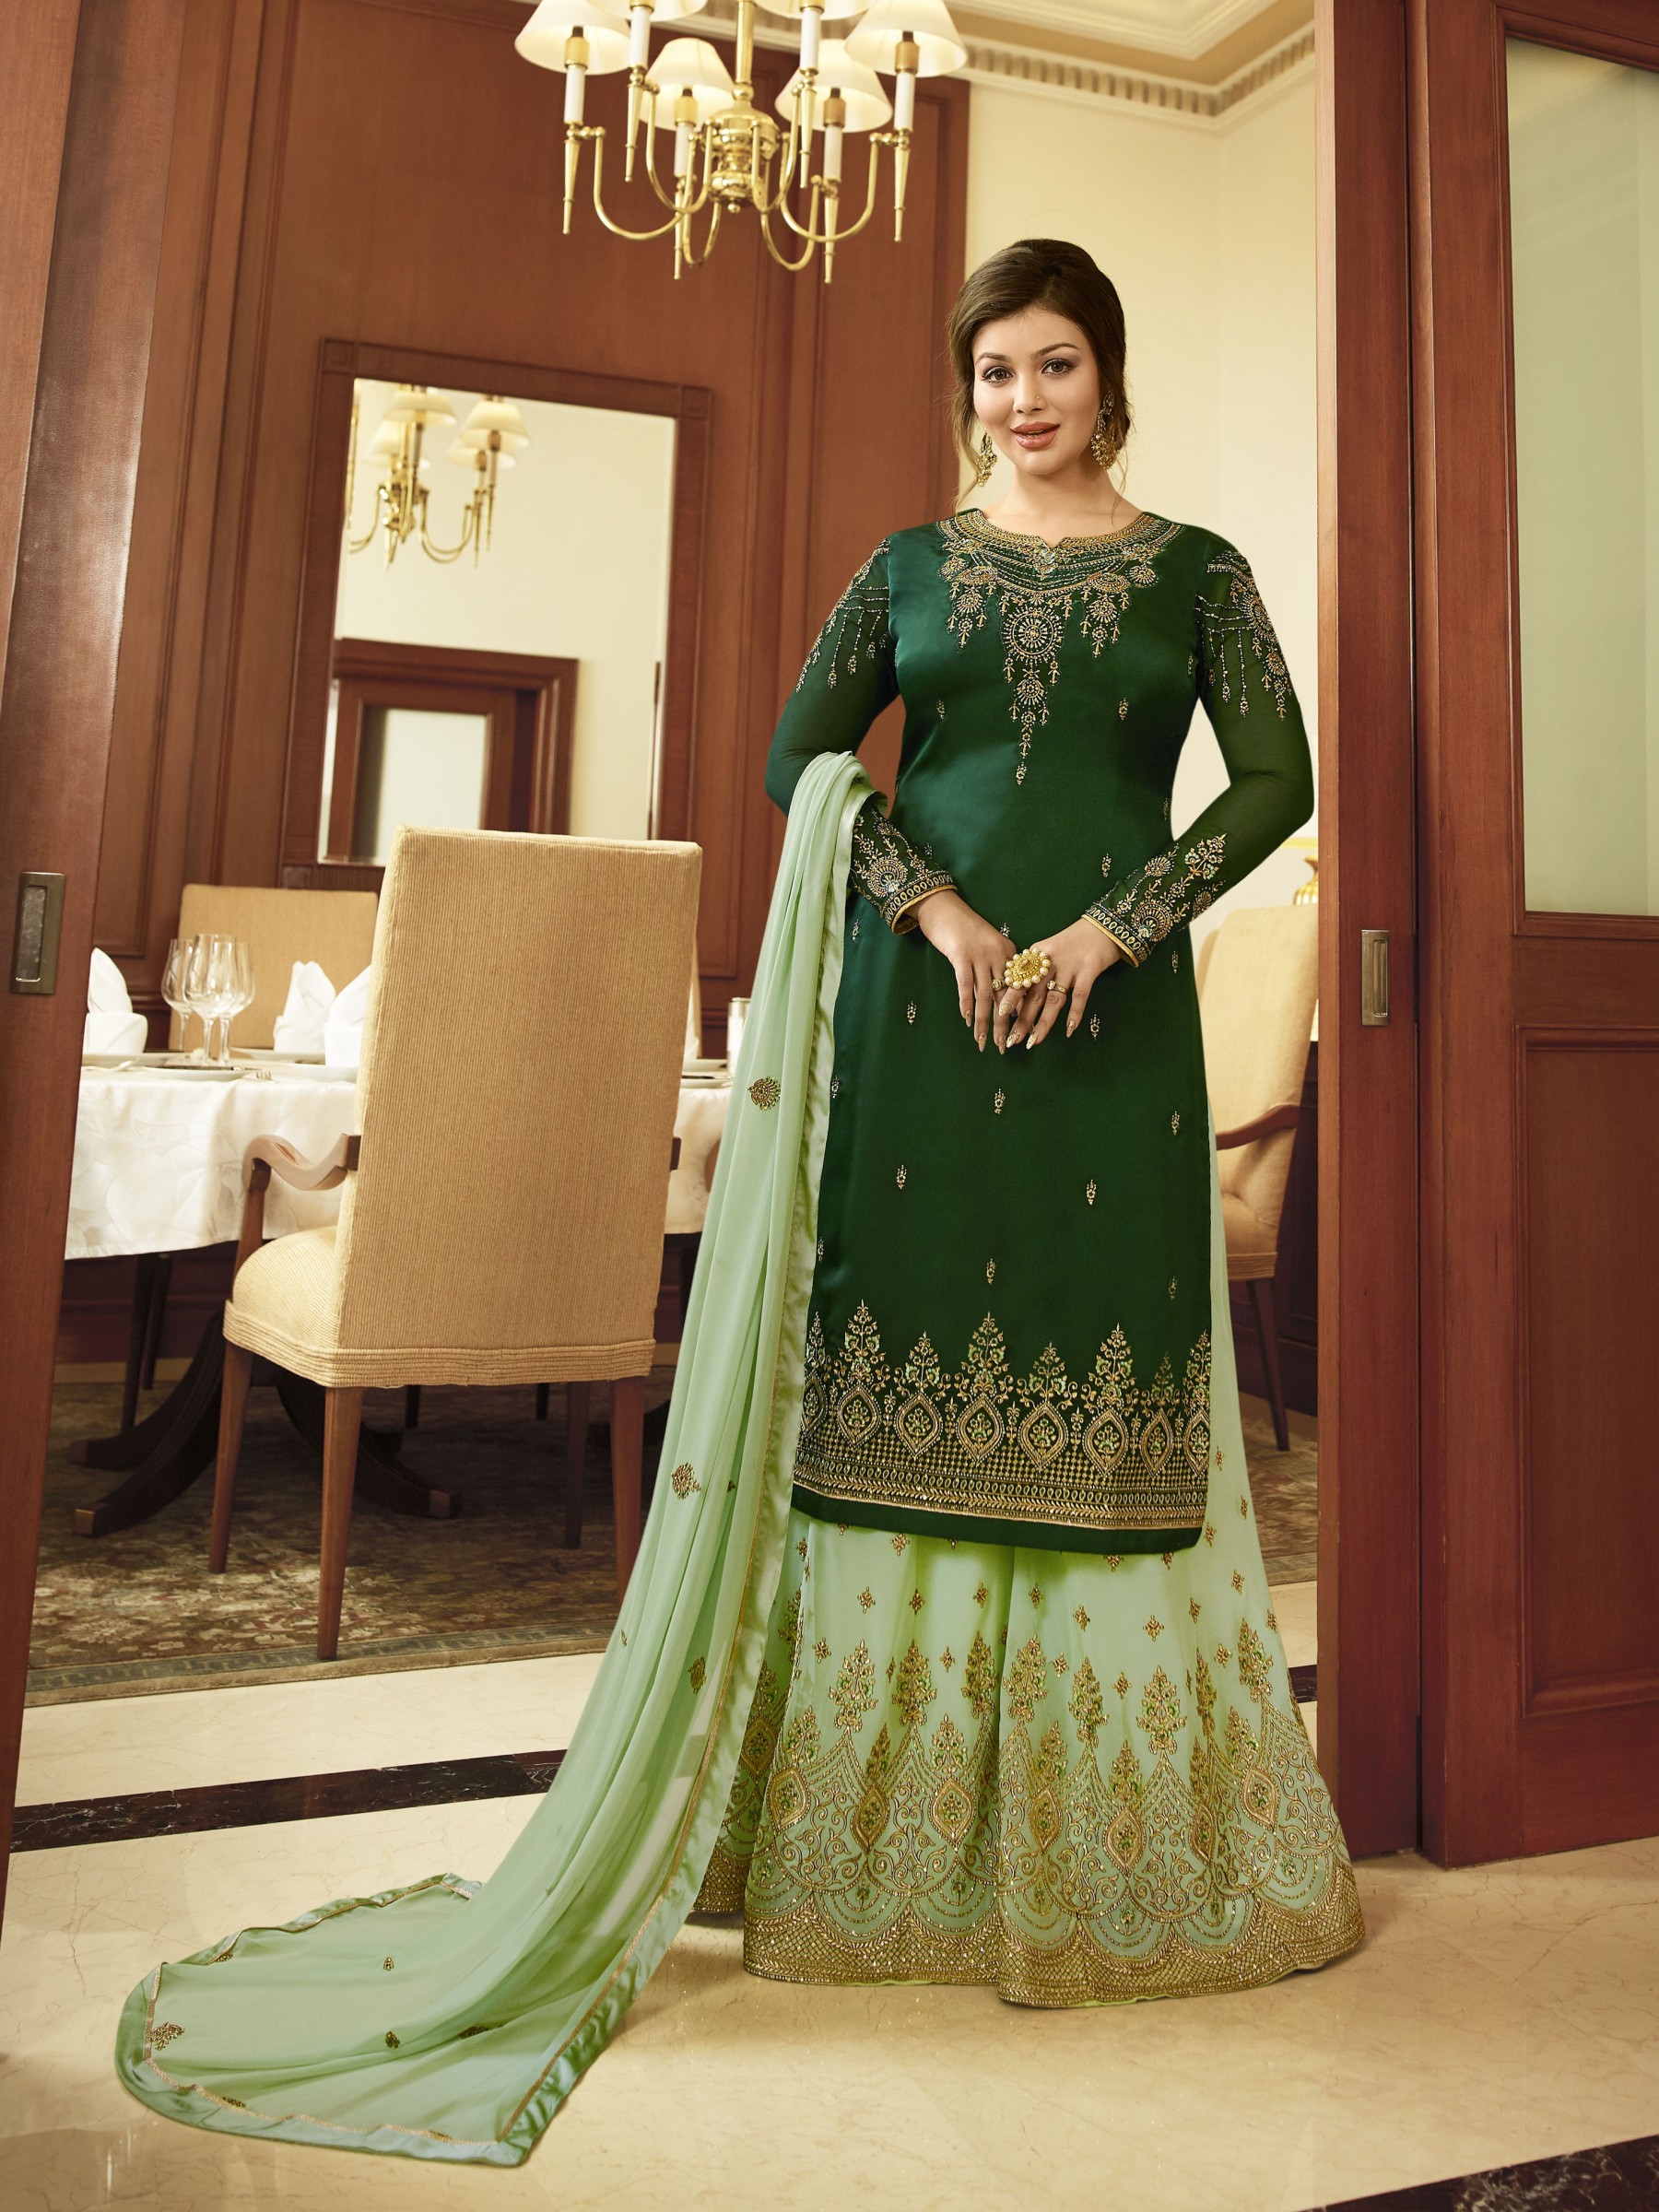 Satin Georgette Party Wear Sharara In Green & Light Green With Embroidery Work